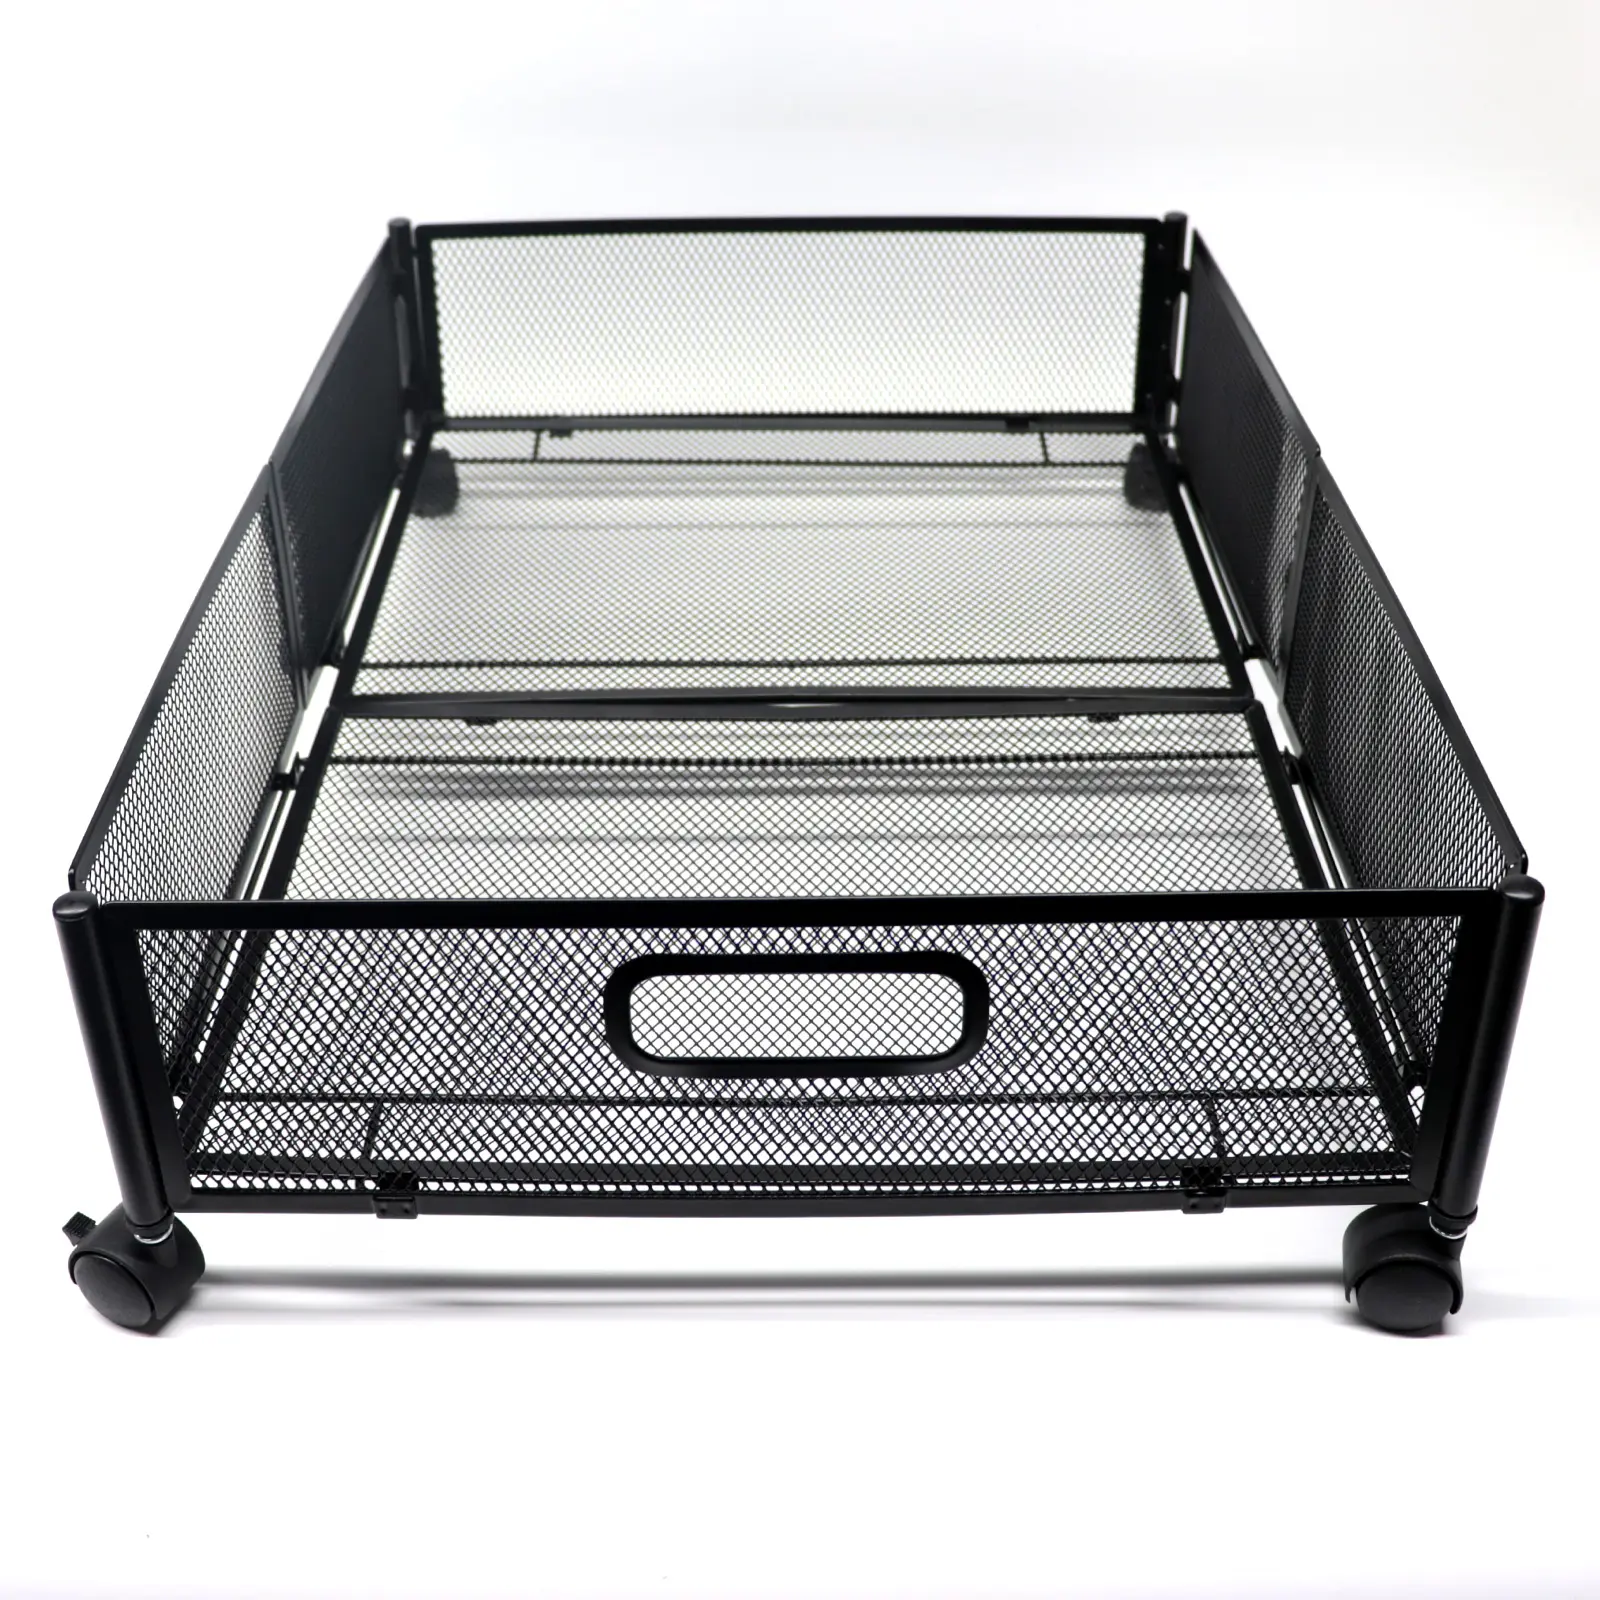 Hot Sale Under Bed Storage with Wheels Foldable Box Container Metal Organizer For Home Travel